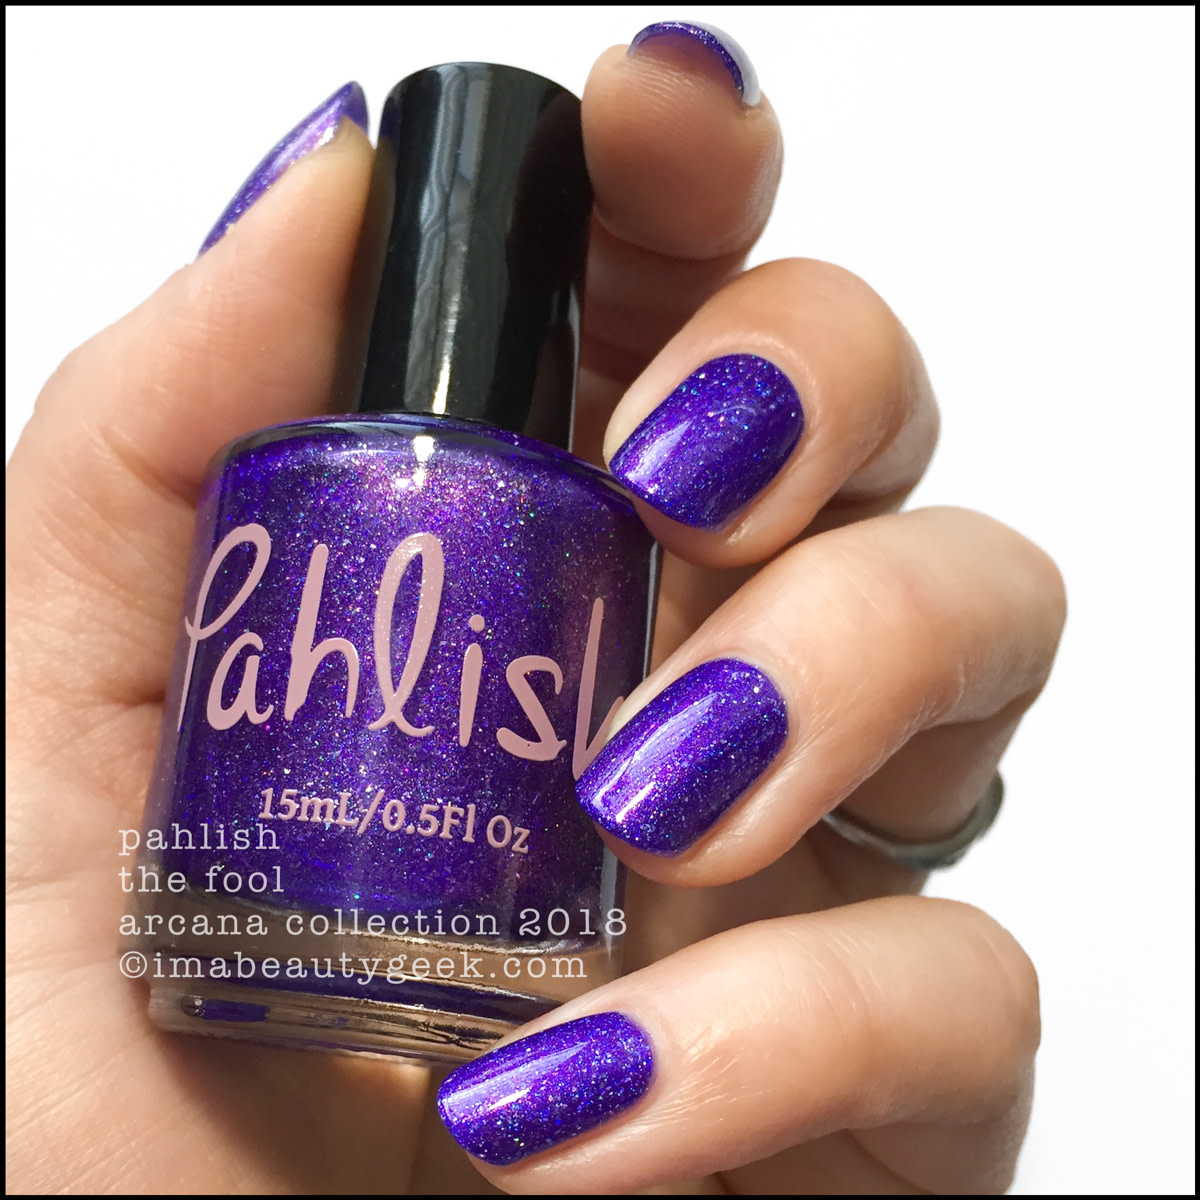 Pahlish The Fool 2 - Pahlish Arcana Collection Swatches Review 2018